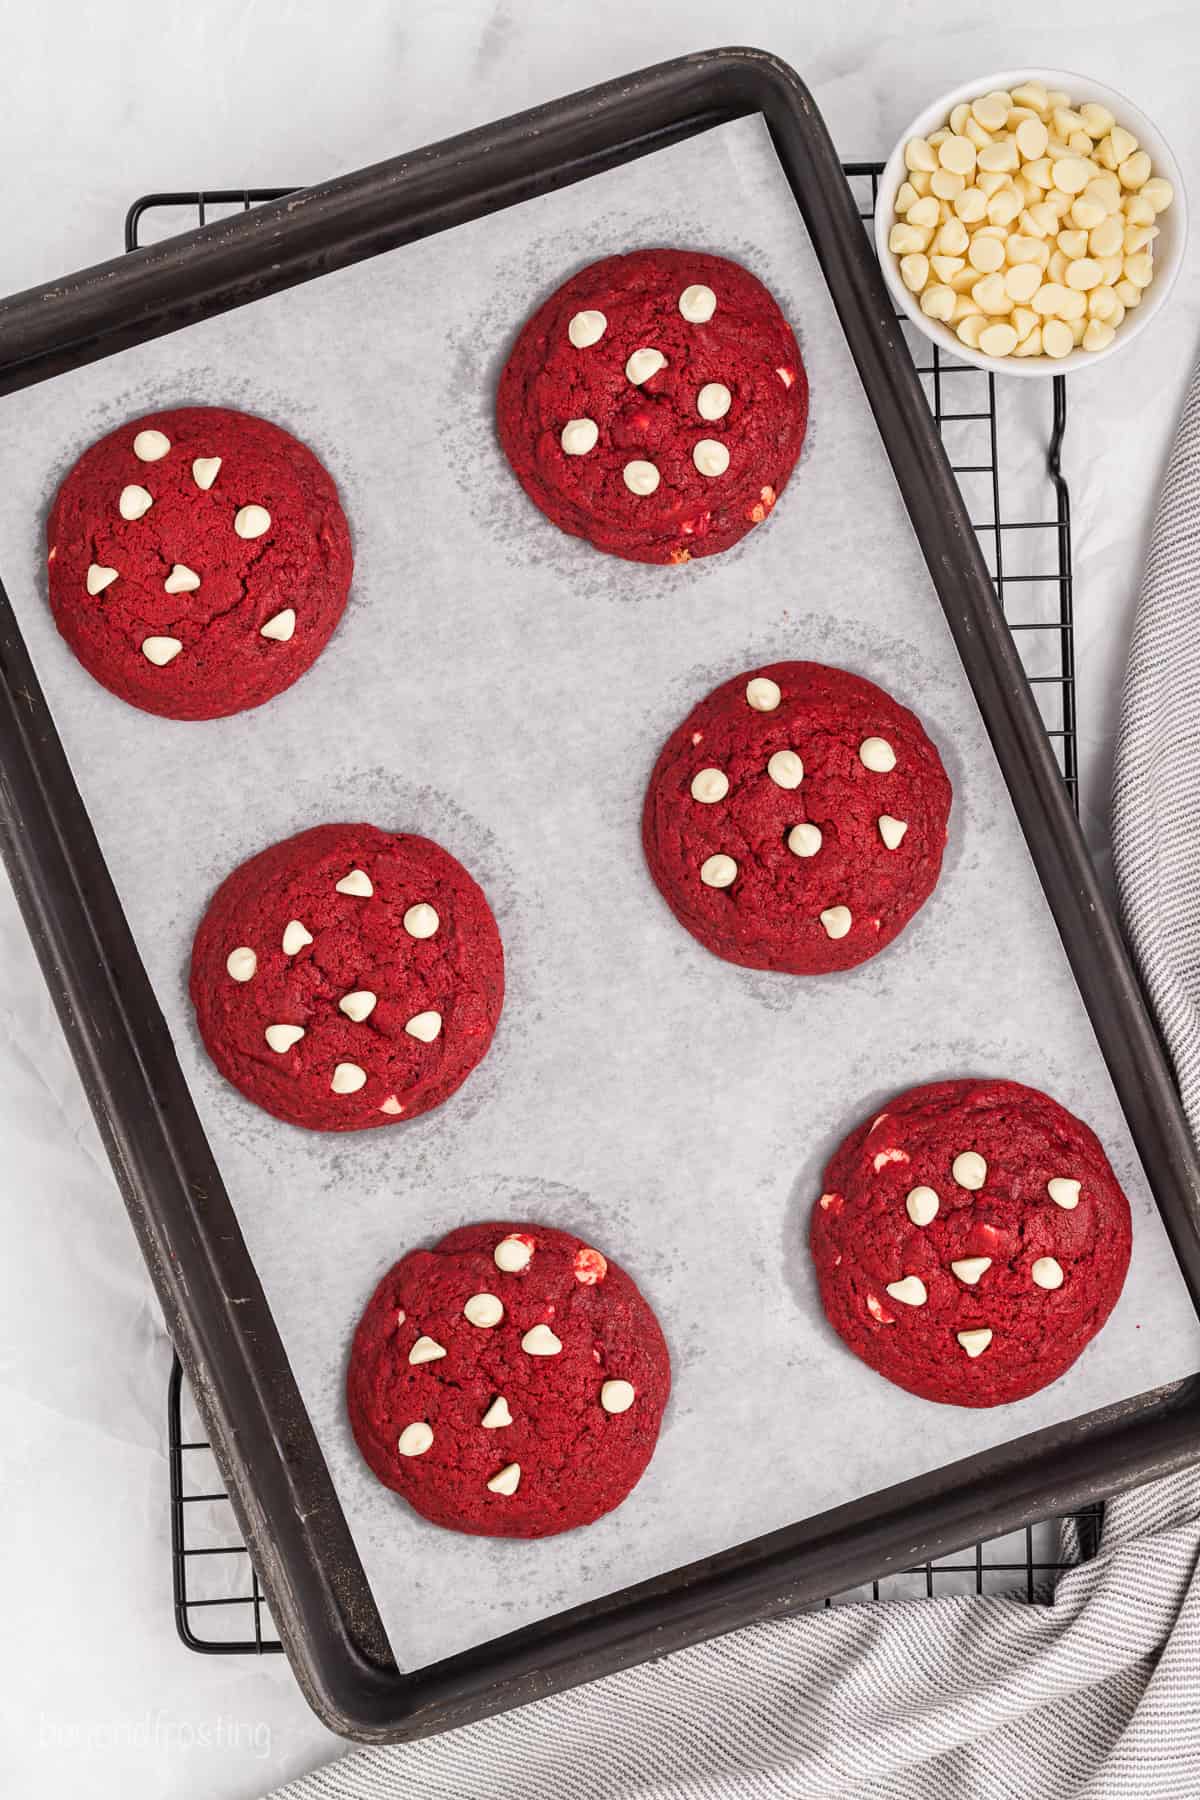 Overhead view of six red velvet cookies topped with white chocolate chips on a parchment-lined baking sheet.